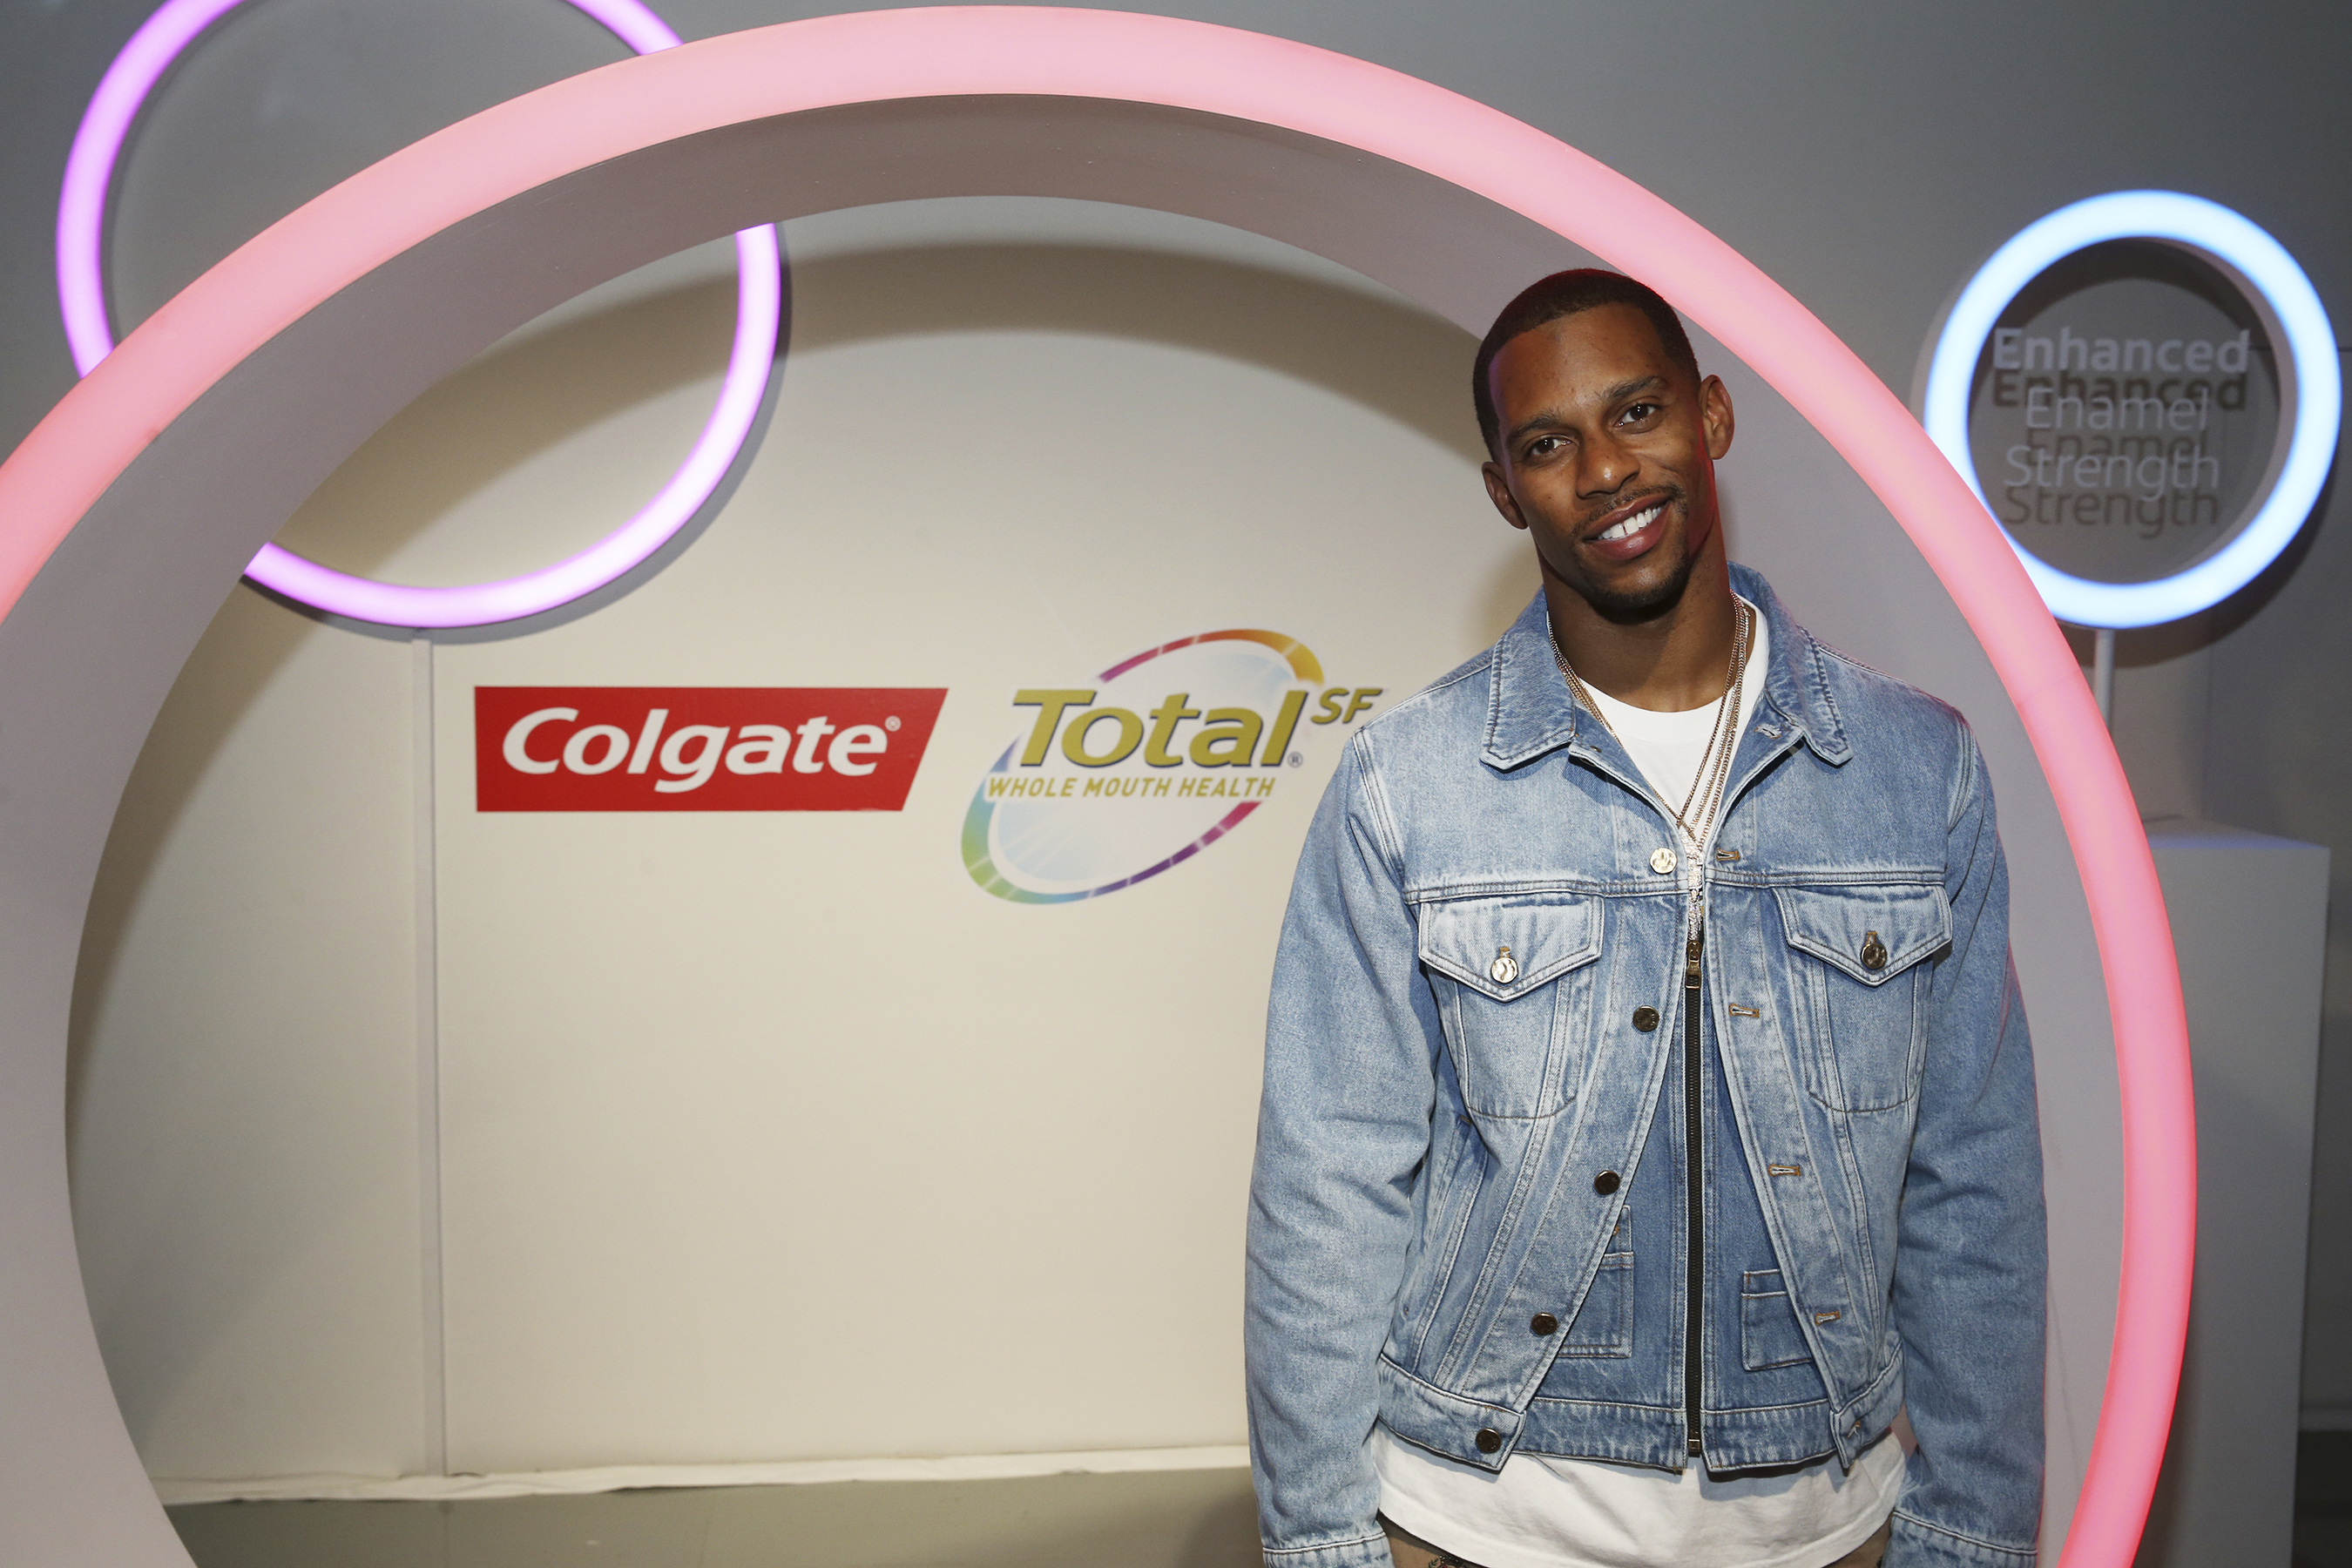 American football wide receiver, Victor Cruz, explores the science behind the new Colgate Total(SF) product line at the Colgate Total(SF) Experience